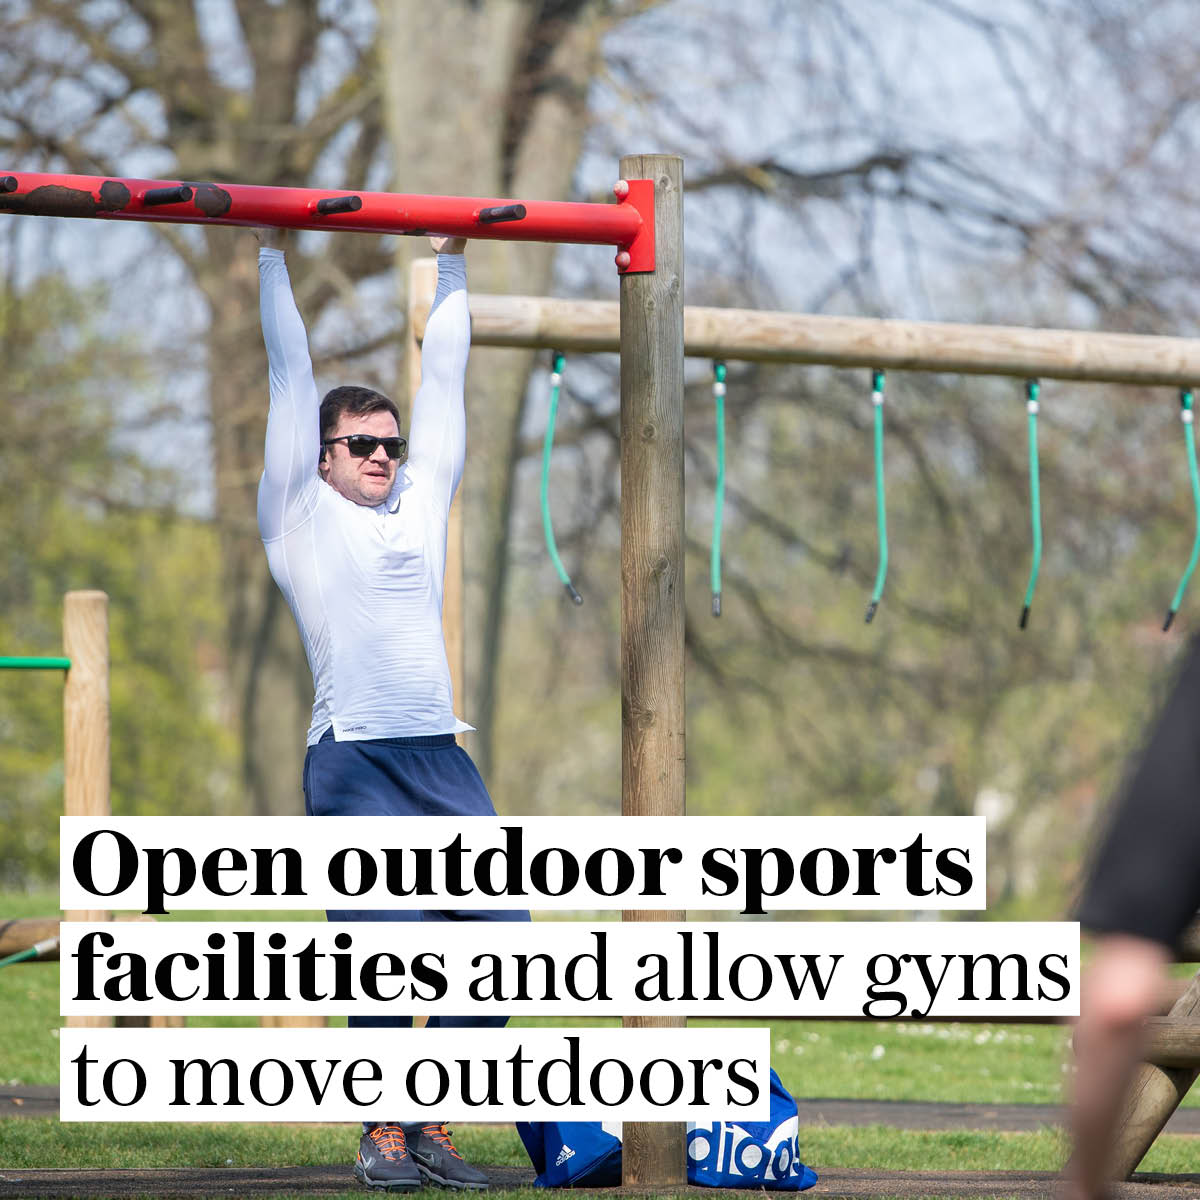 Even in the midst of the current third wave of the virus, it is hard to understand why outdoor tennis, golf and other well-spaced sports facilities have had to shut downOutdoor sports should be prioritised when current restrictions are lifted https://www.telegraph.co.uk/global-health/science-and-disease/five-things-government-must-do-now-save-spring-summer-britain/